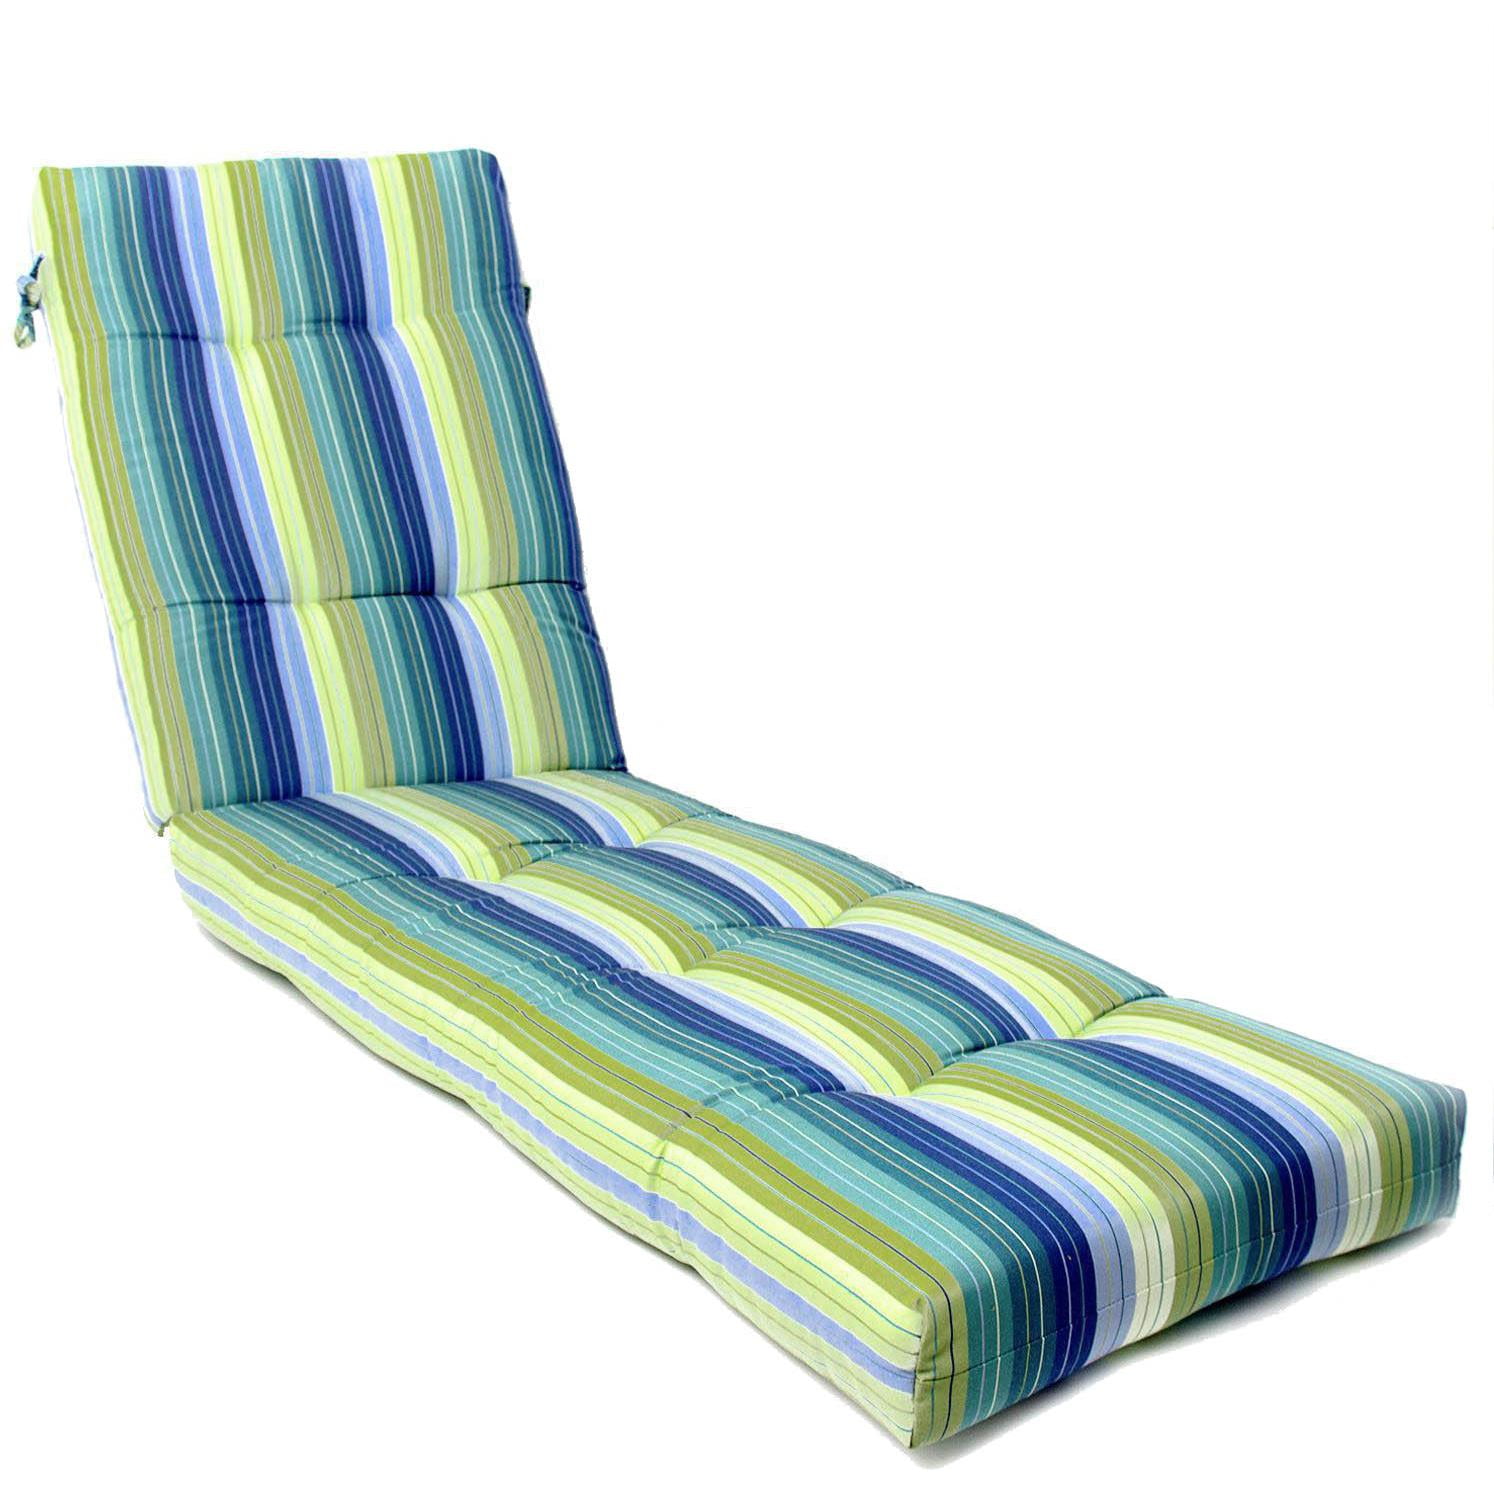 Sunbrella Seville Seaside Extra Long Outdoor Replacement Chaise Lounge